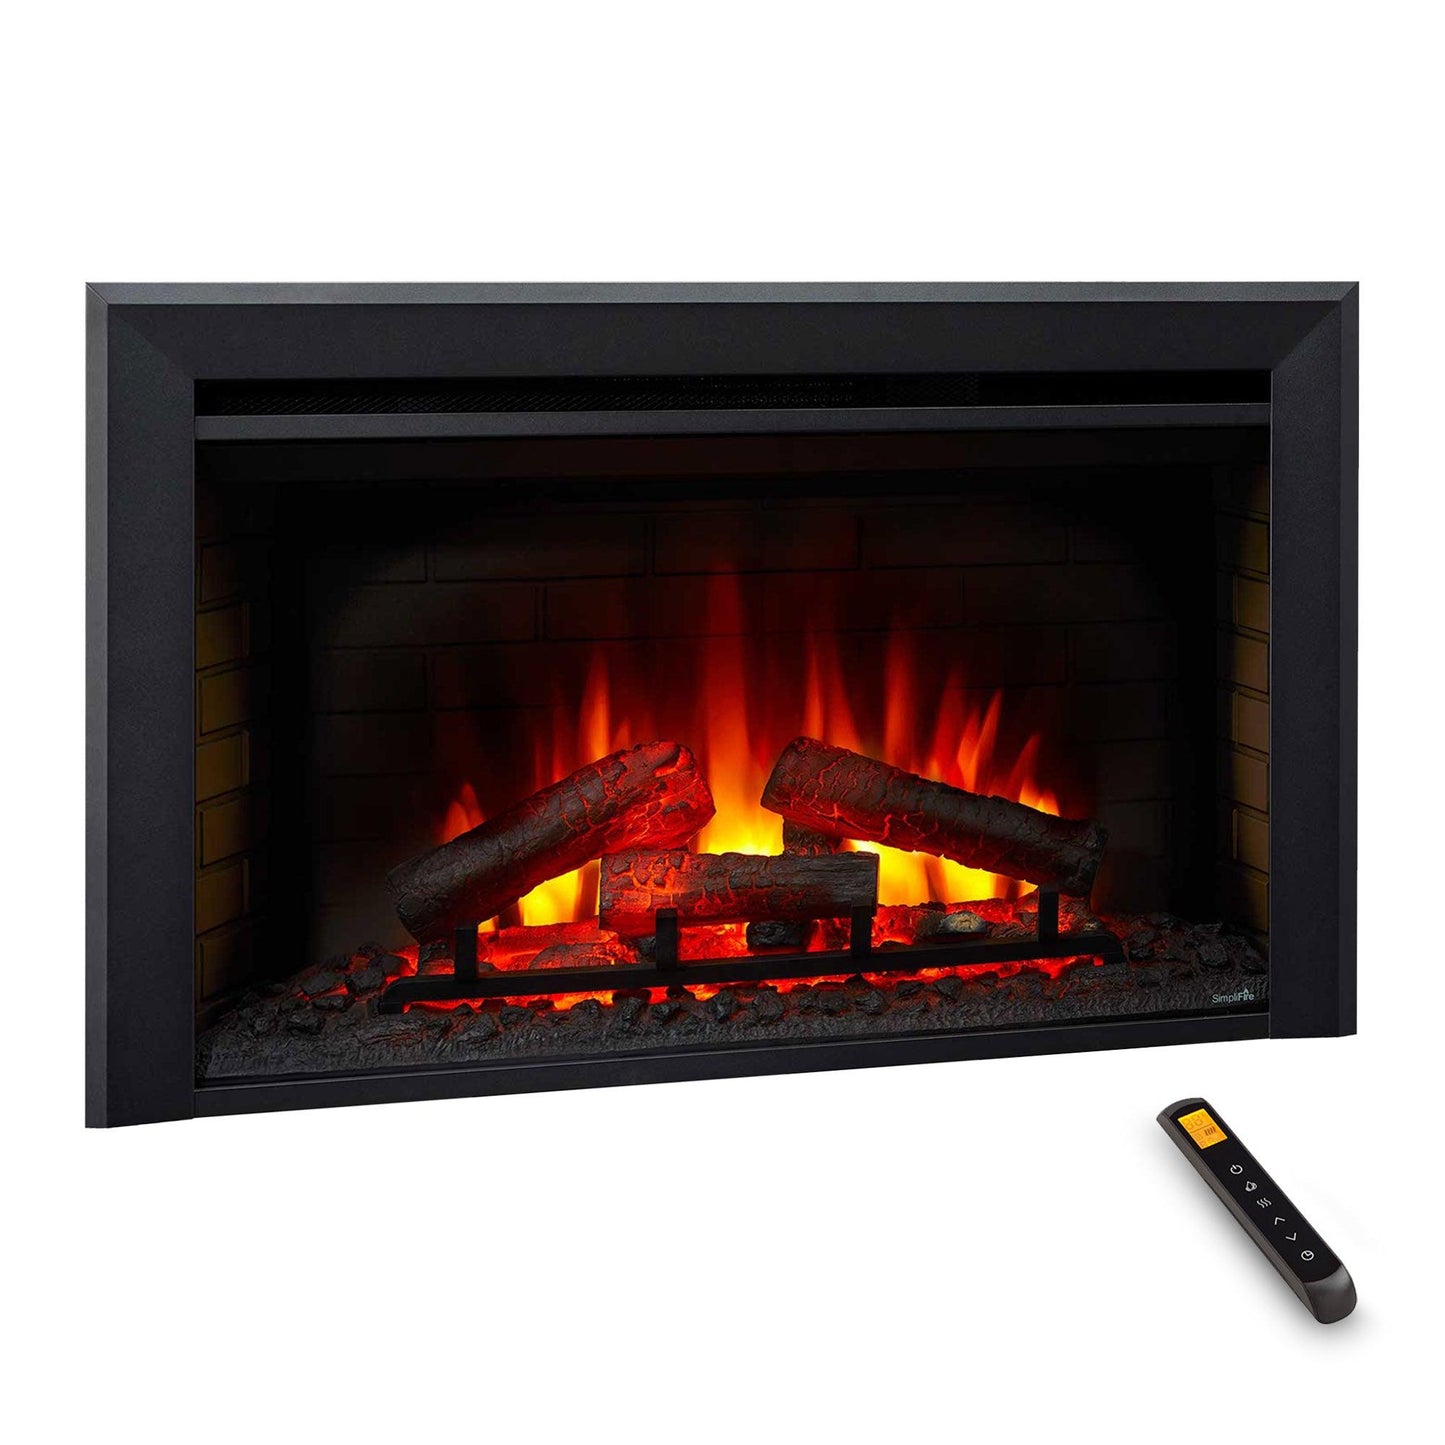 SimpliFire 35" Traditional Electric Built-In Fireplace Insert